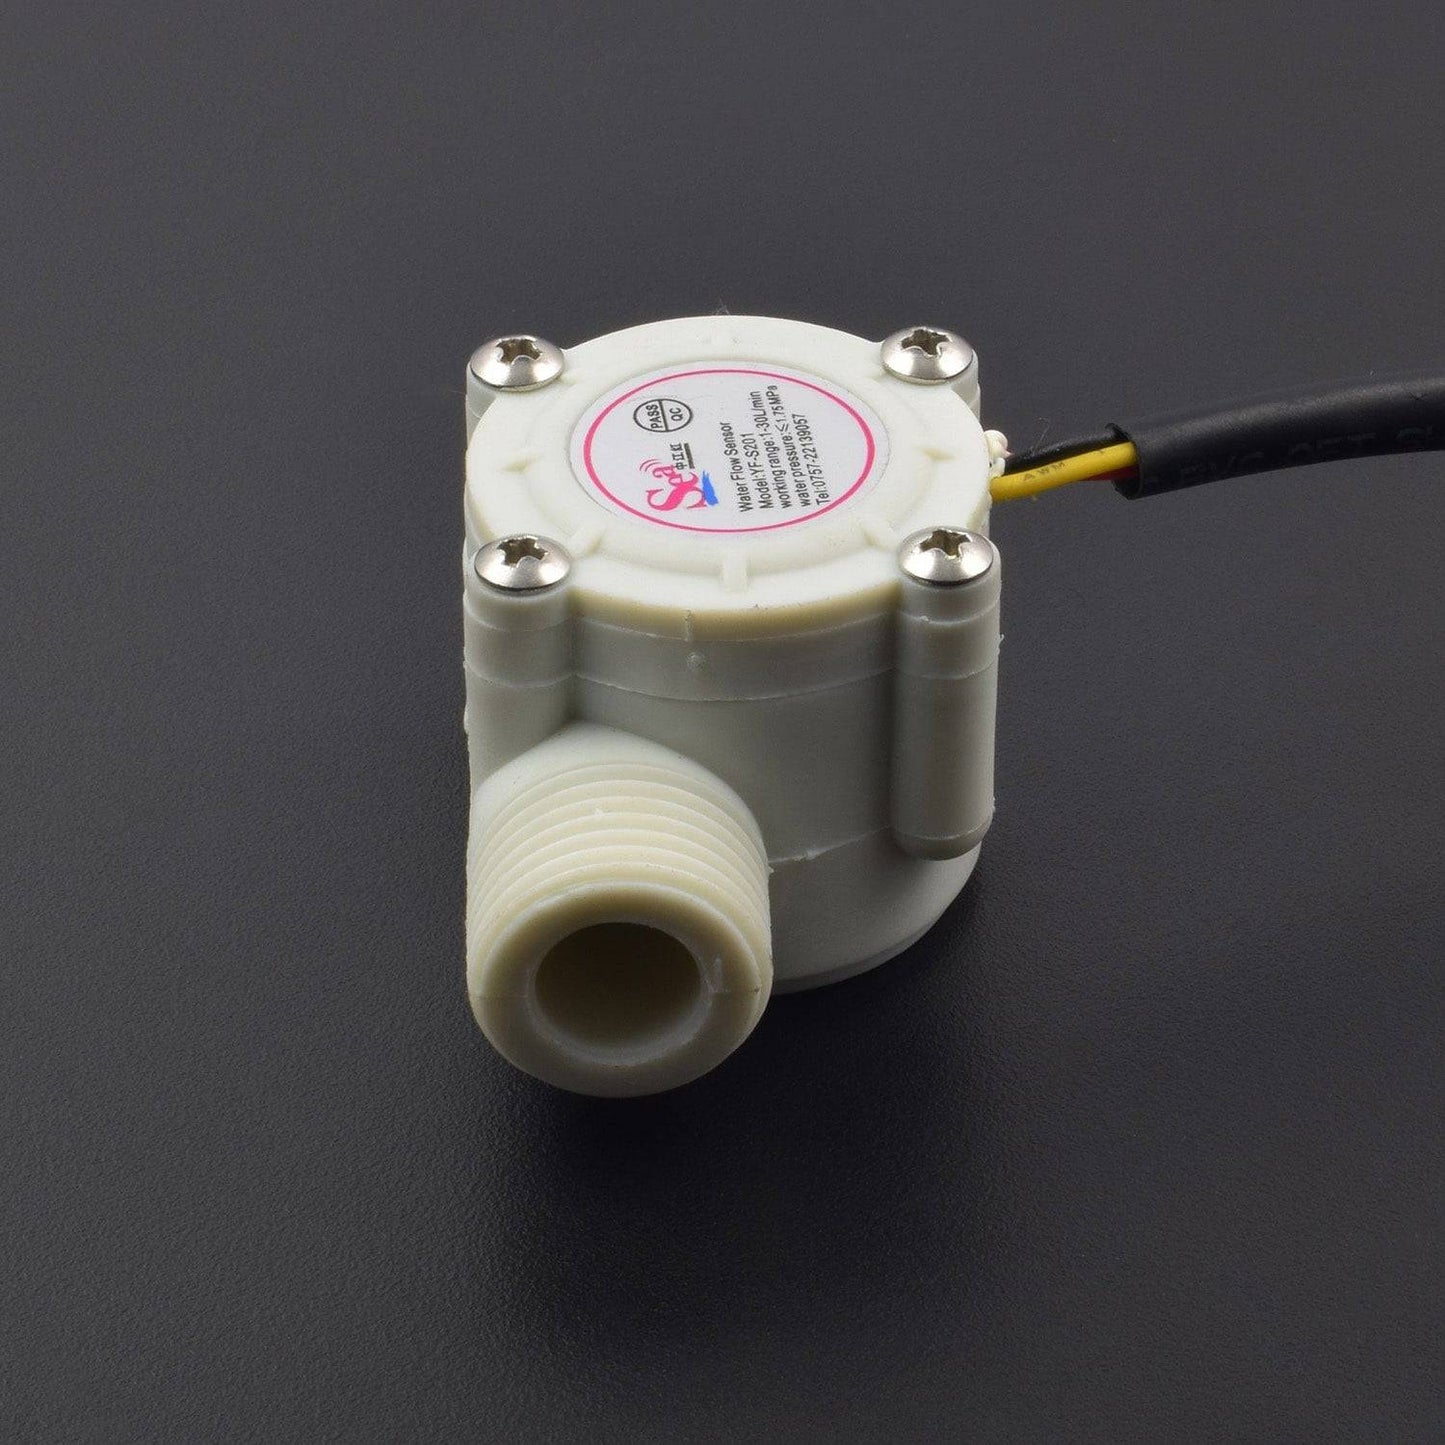 1/2'' Water Flow Sensor or Fluid Flowmeter Control Switch for Arduino Raspberry and Other Mcu Model-YF-S201- SR040 - REES52